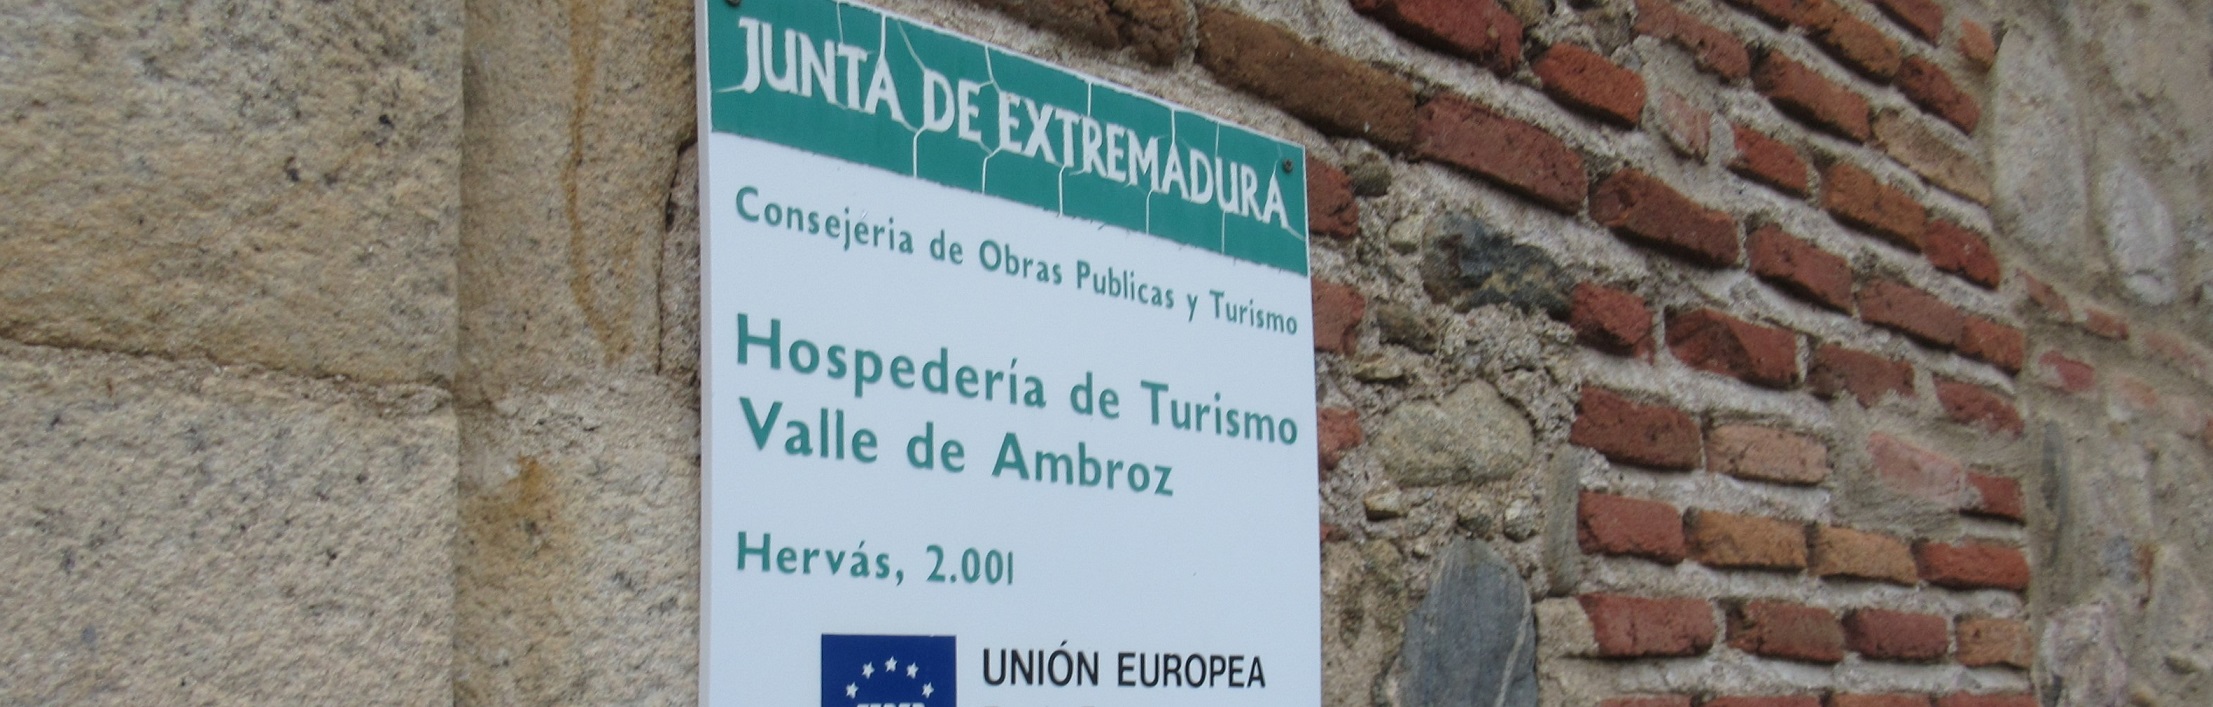 Project meeting in Extremadura